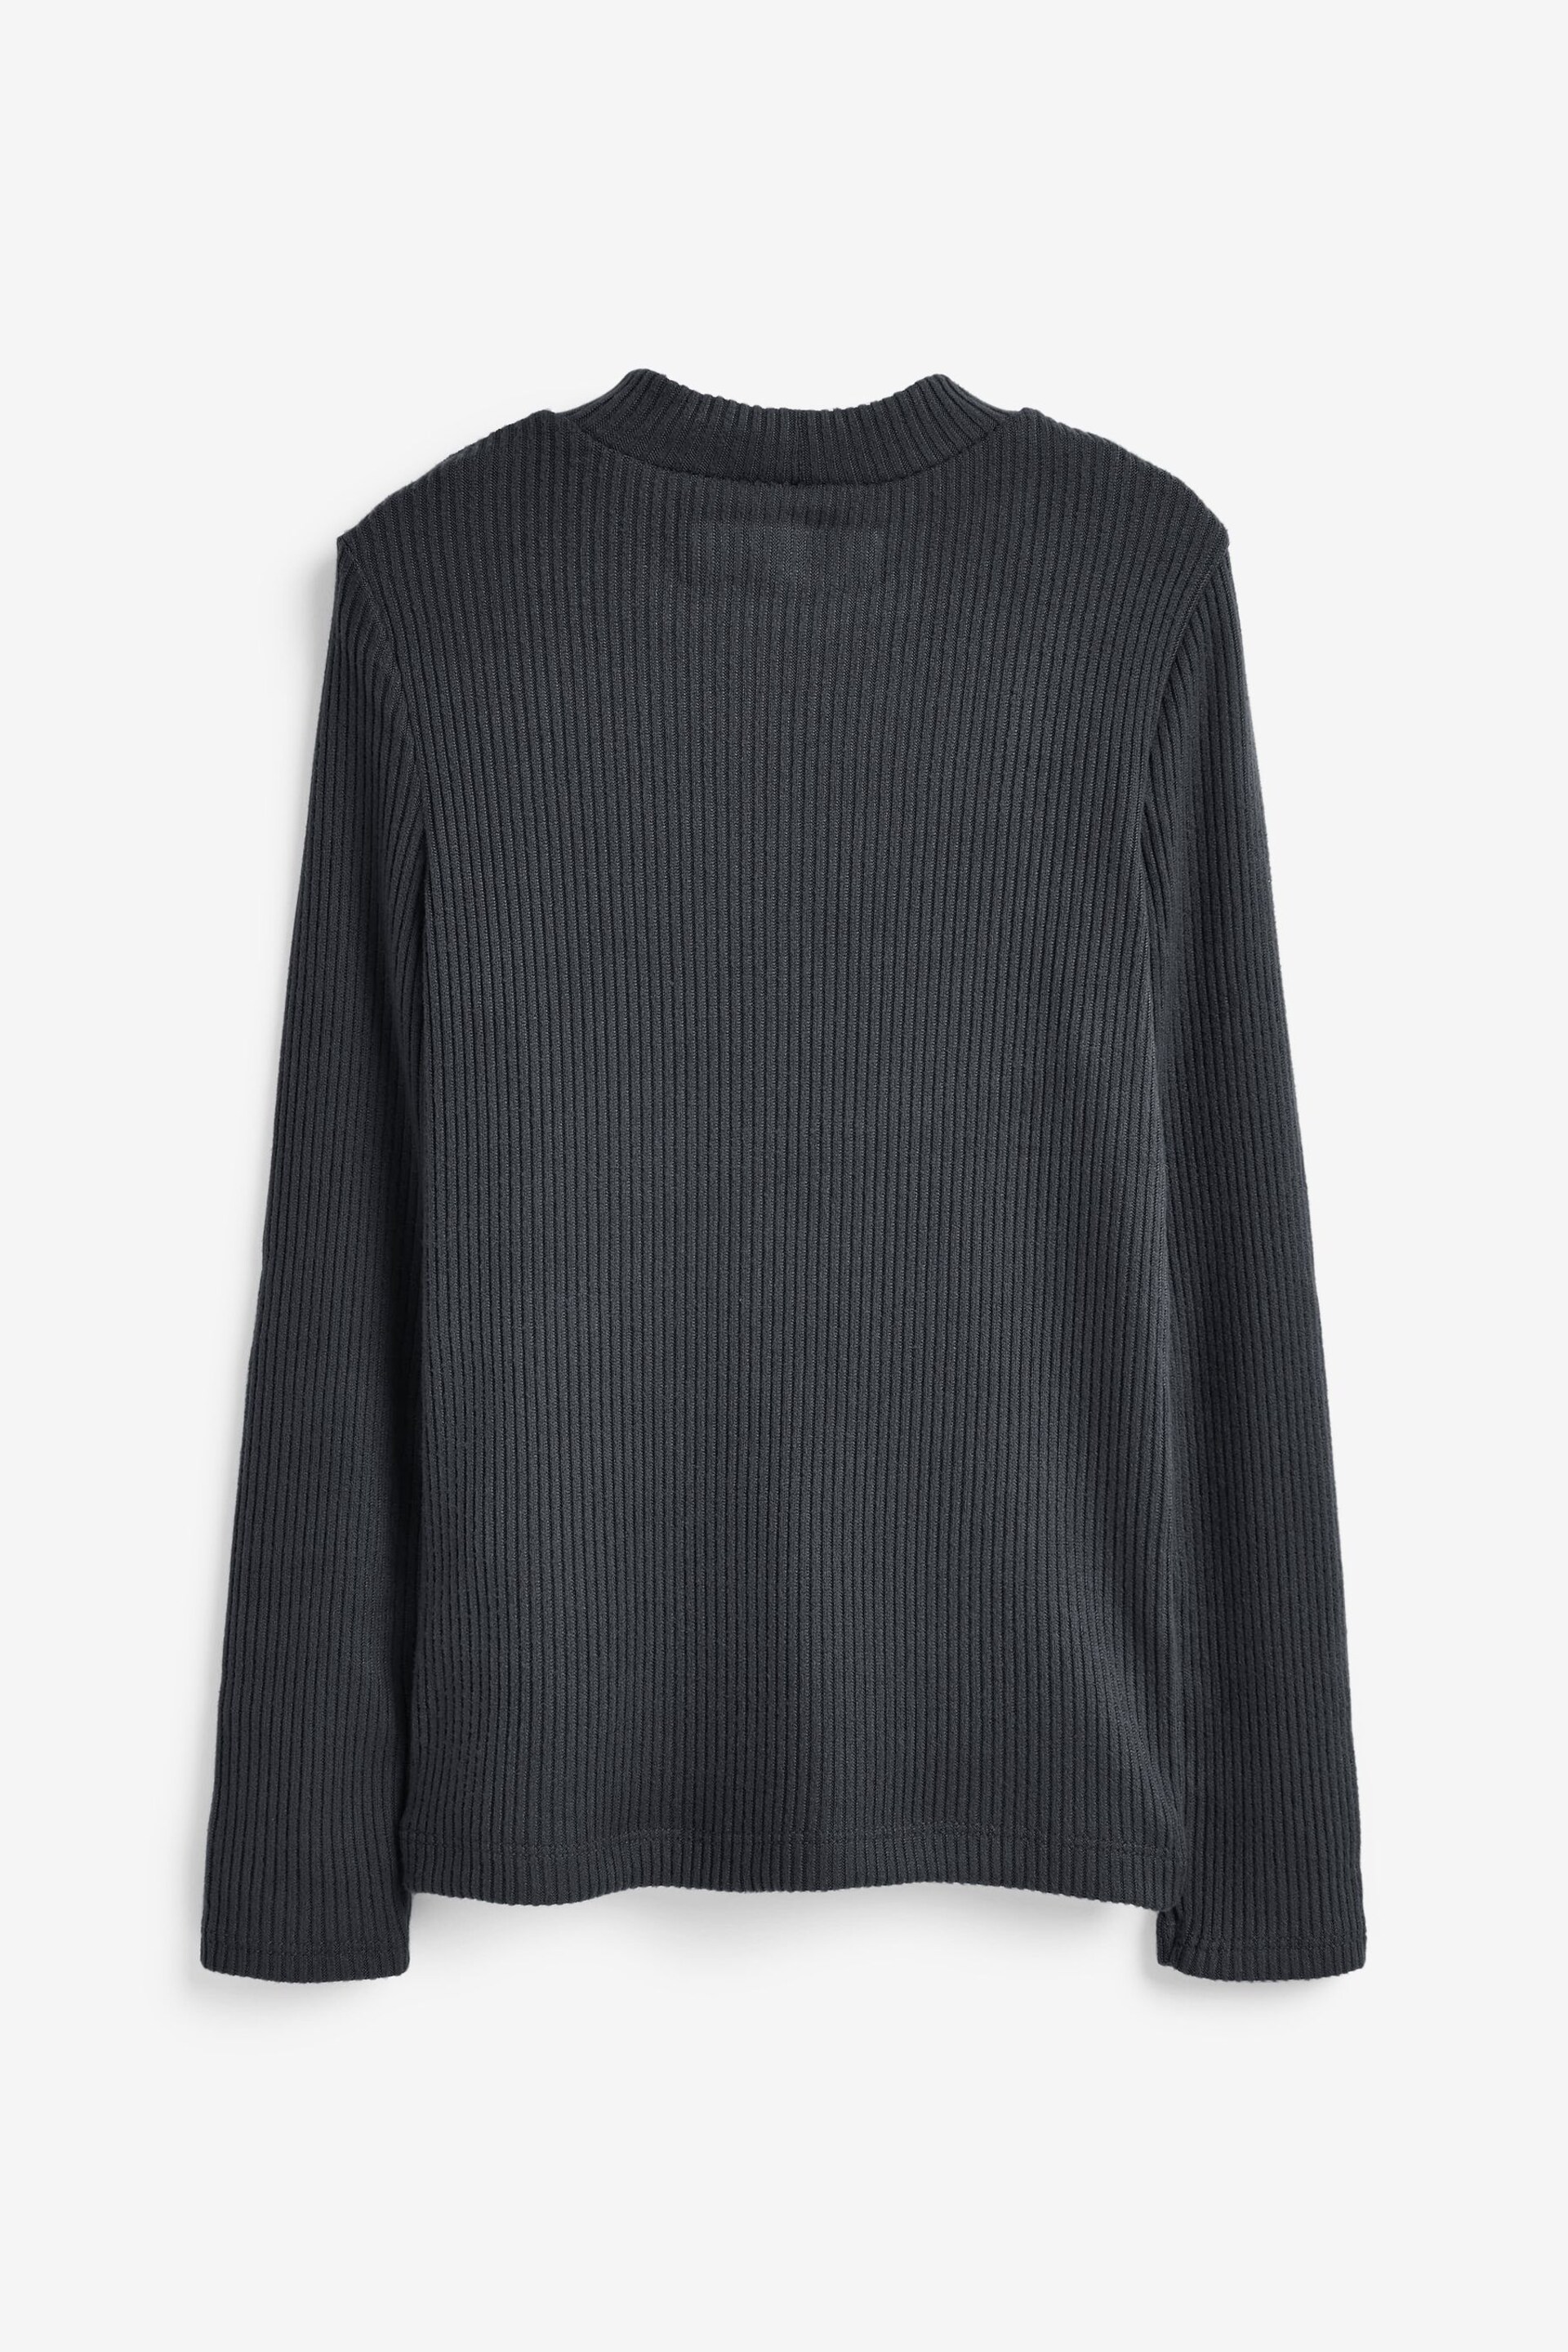 Abercrombie & Fitch Black Essential Cosy Mock Roll Neck Top - Image 2 of 3